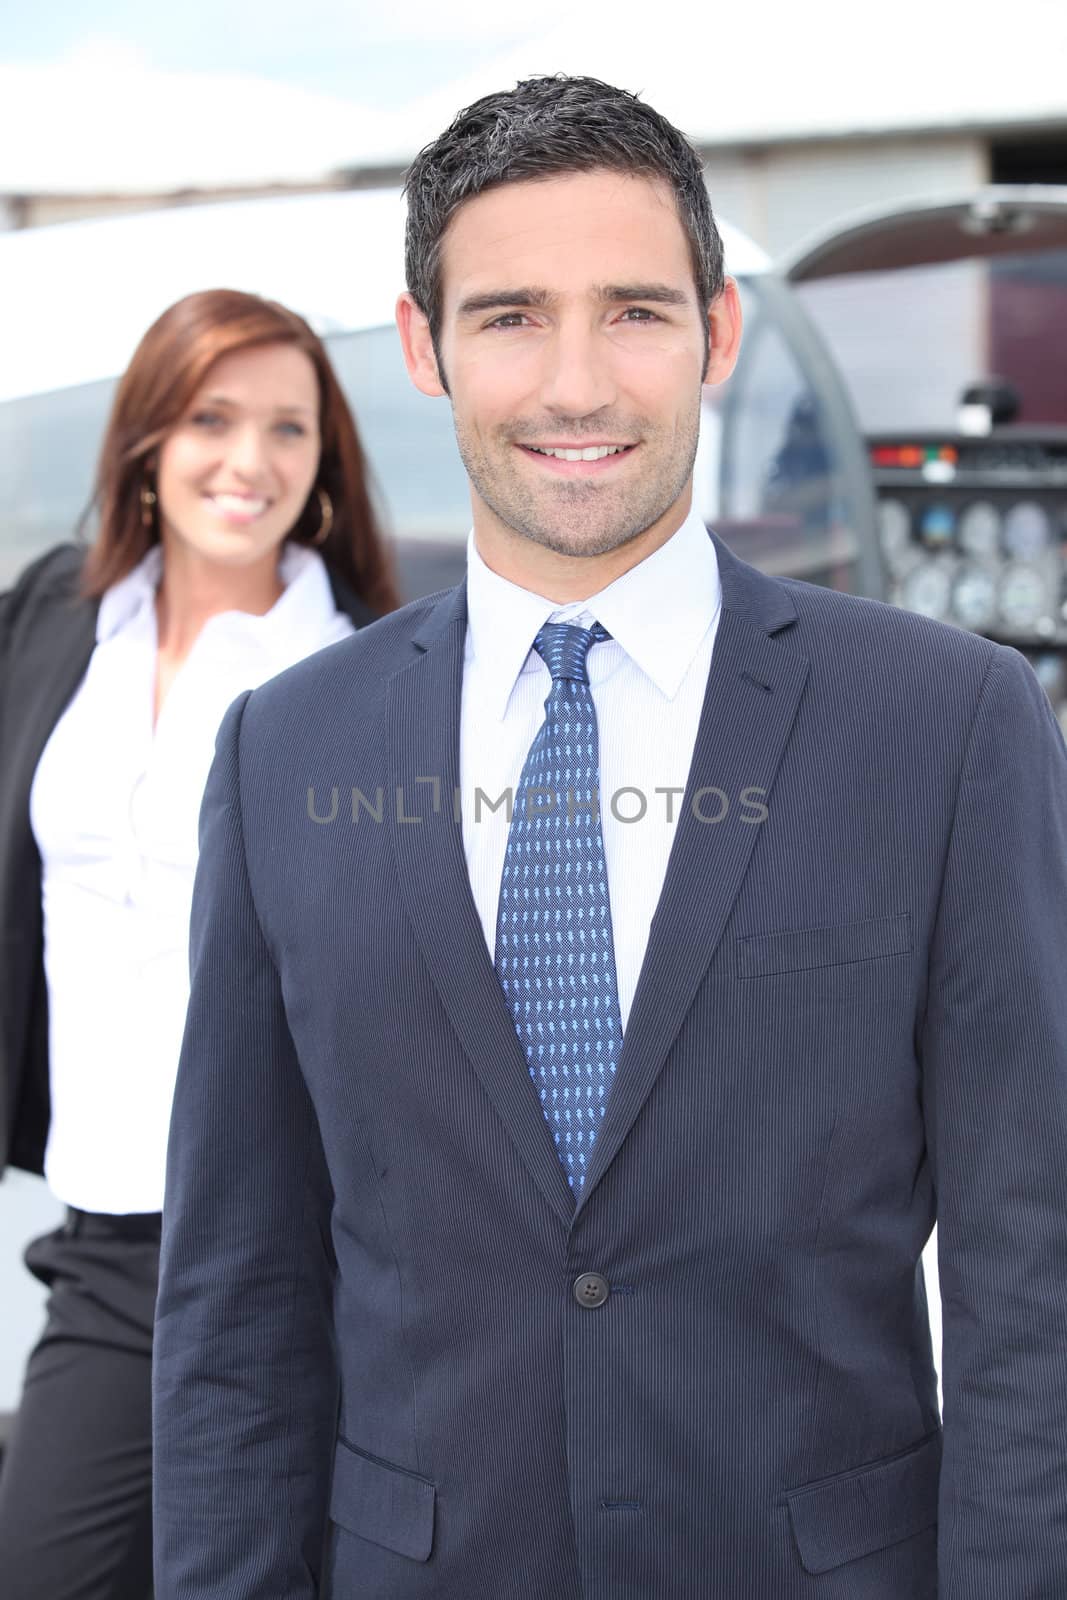 Businessman standing with a woman and light aircraft